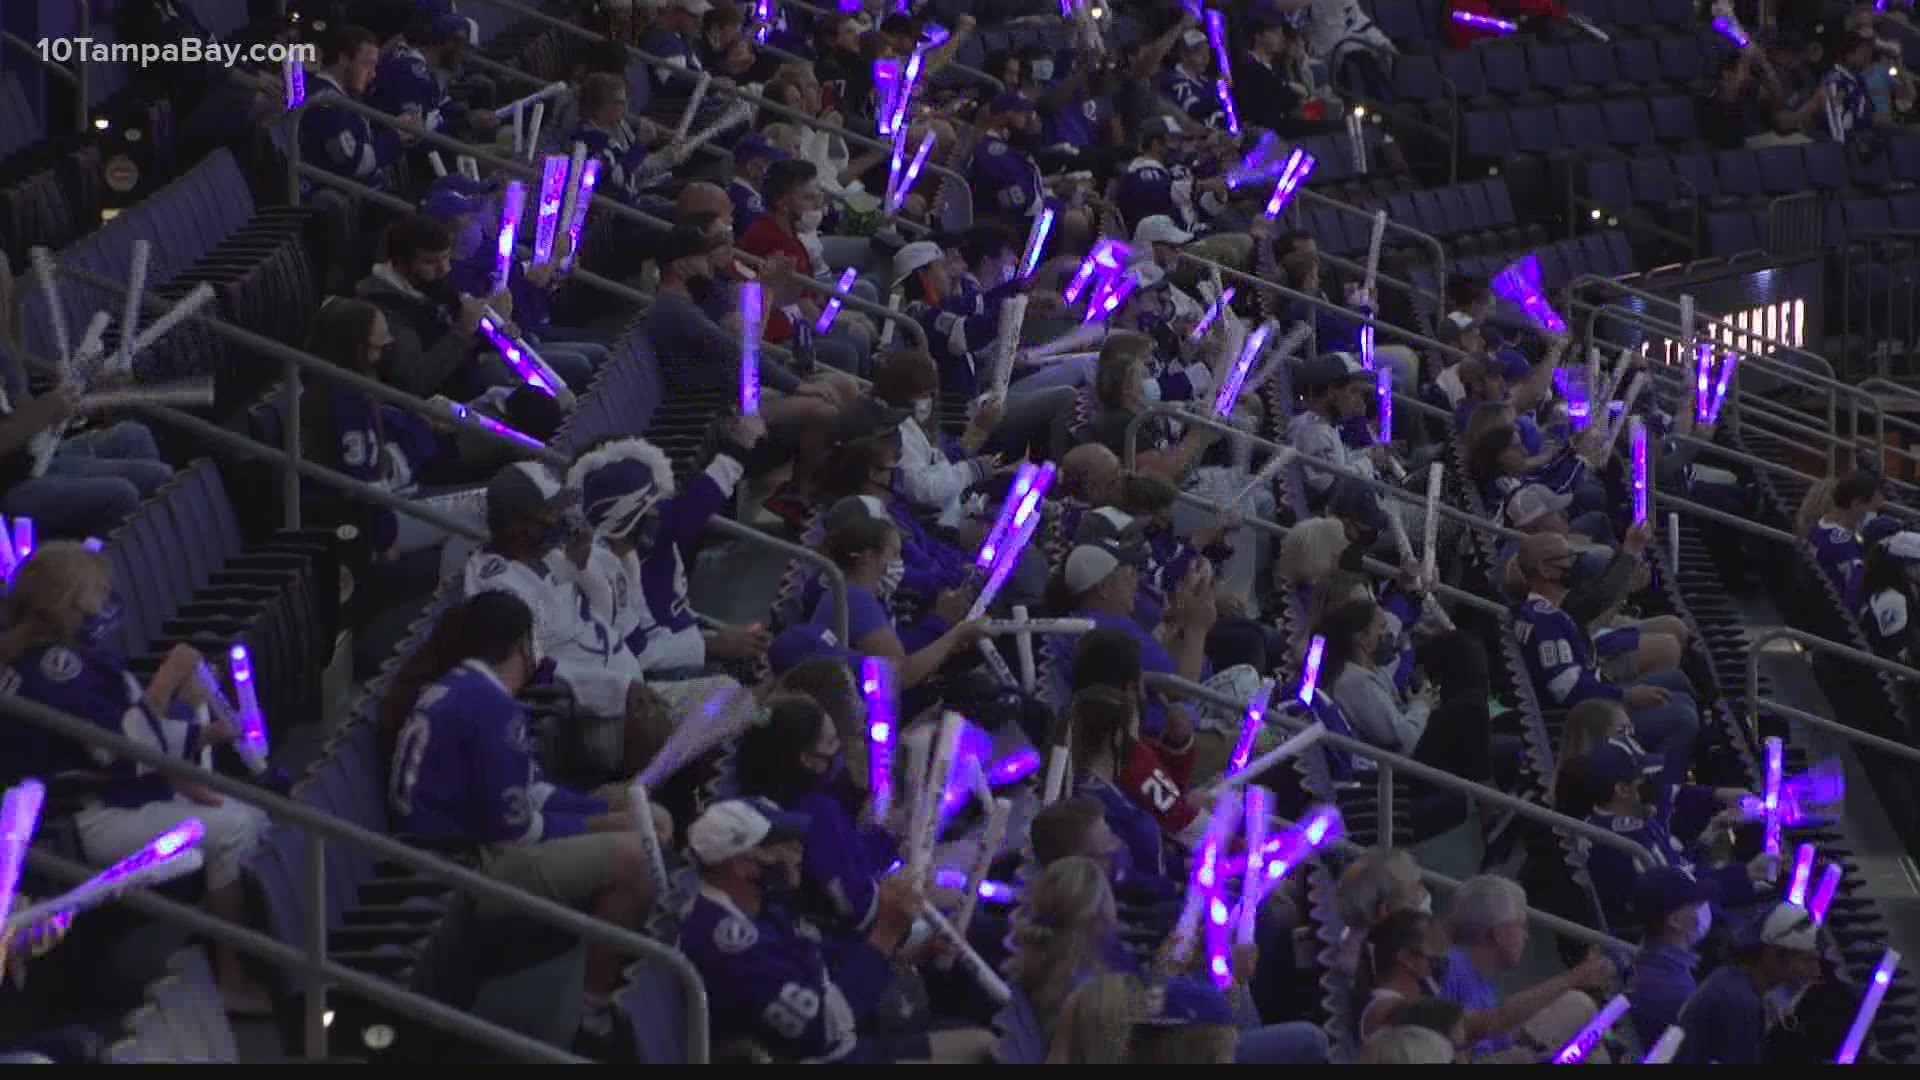 Watch parties inside the arena weren't allowed last season due to COVID-19 restrictions.